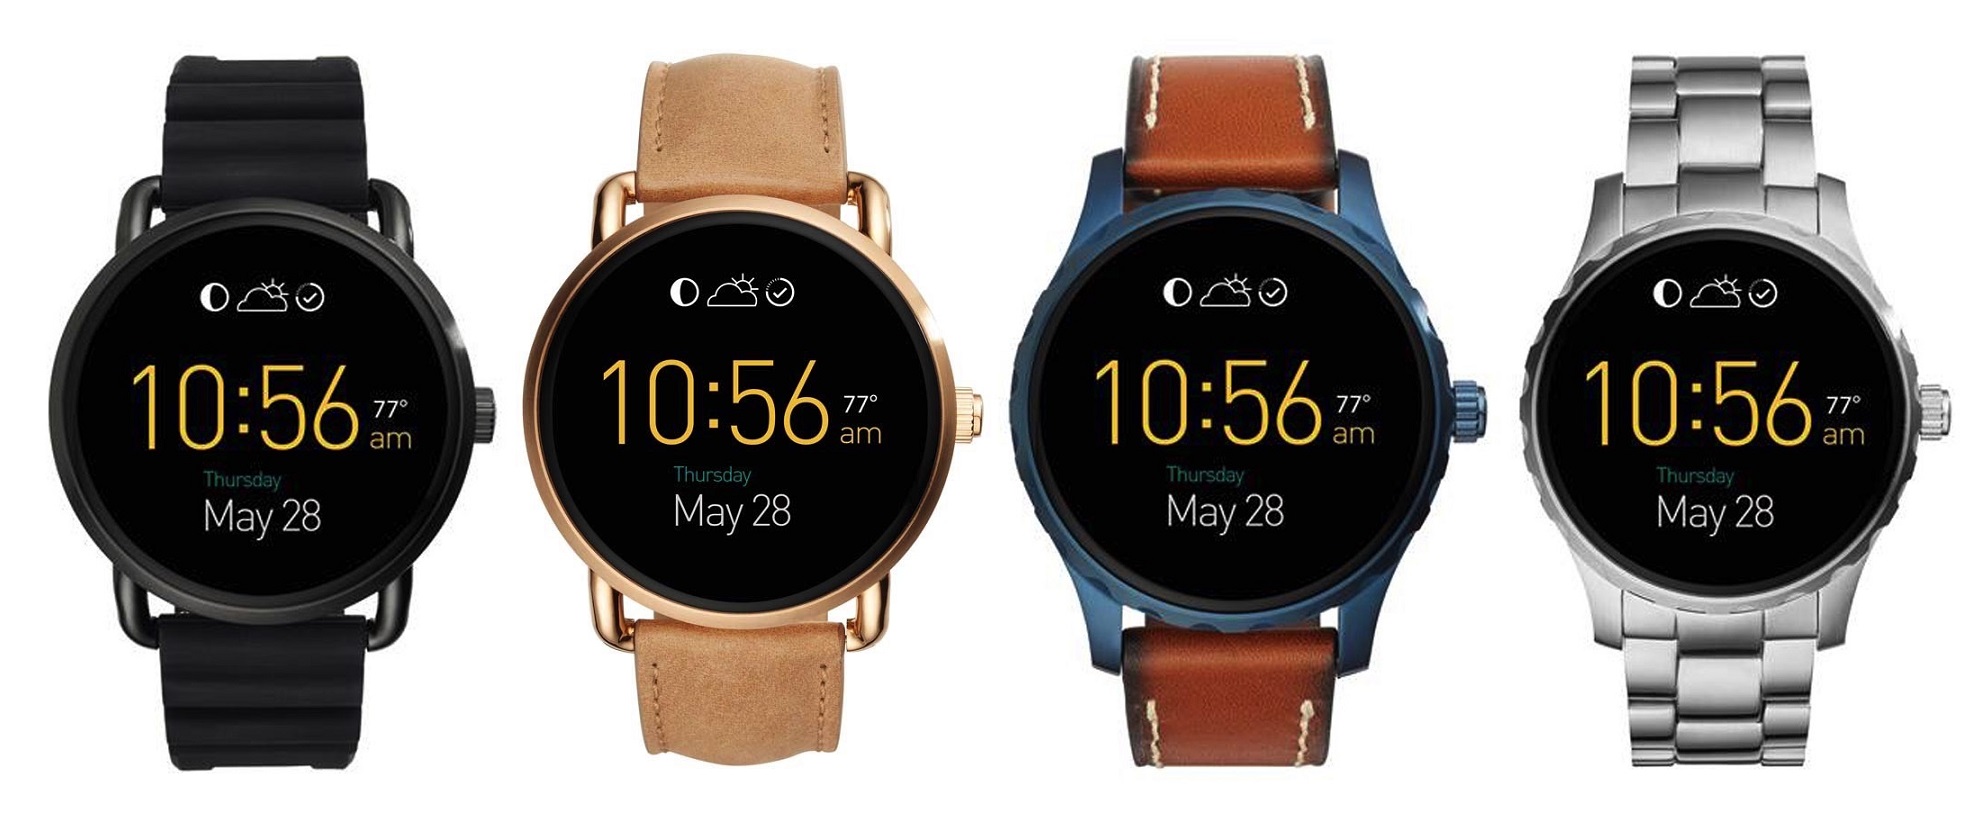 Fossil Q Android Wear